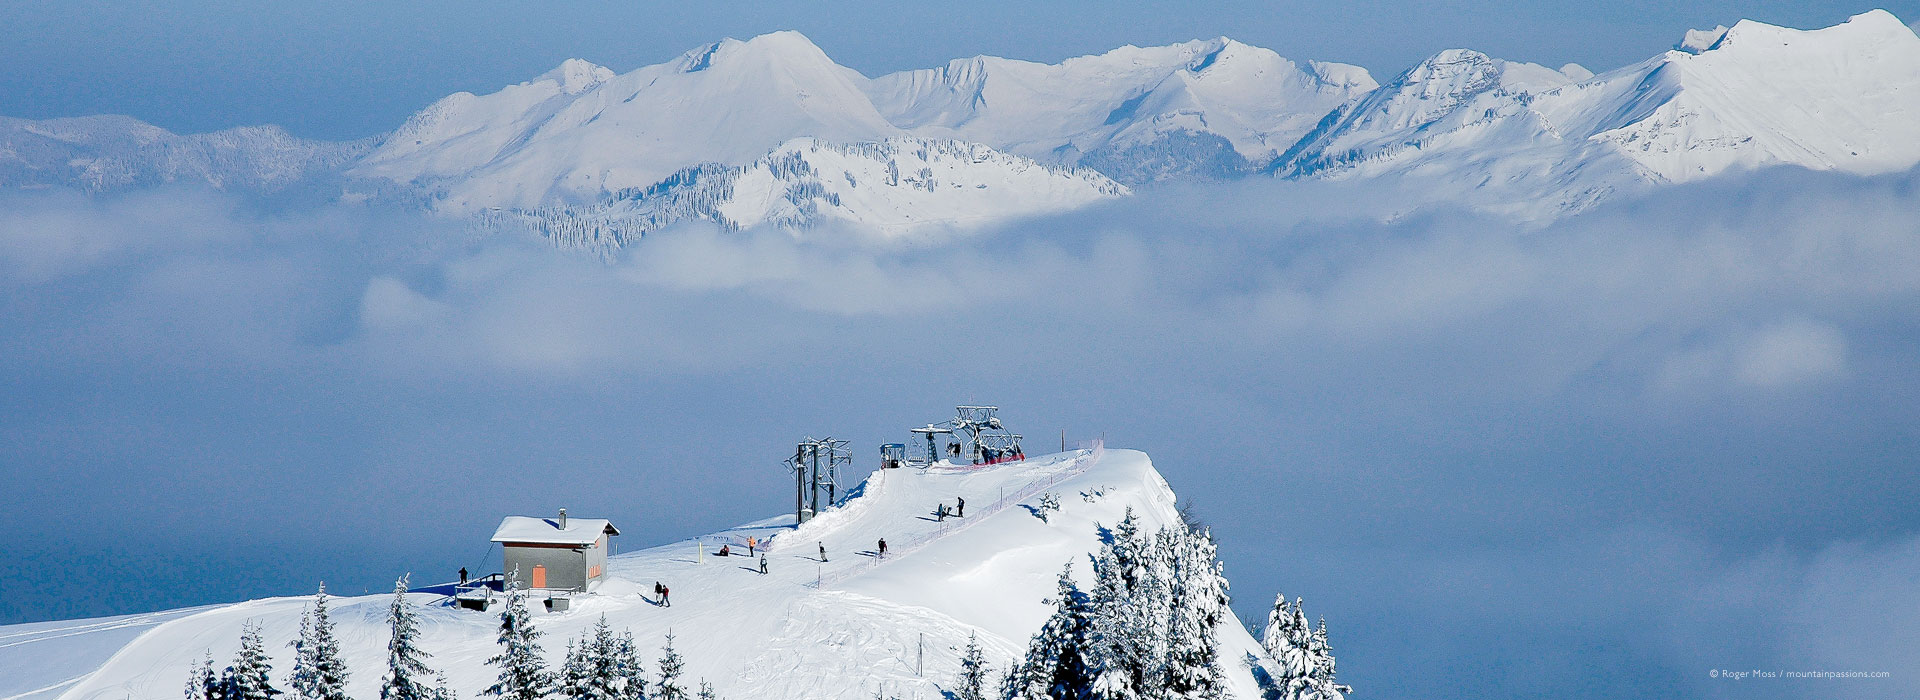 High view of chairlift with skiers, with mountains above clouds at Samoens